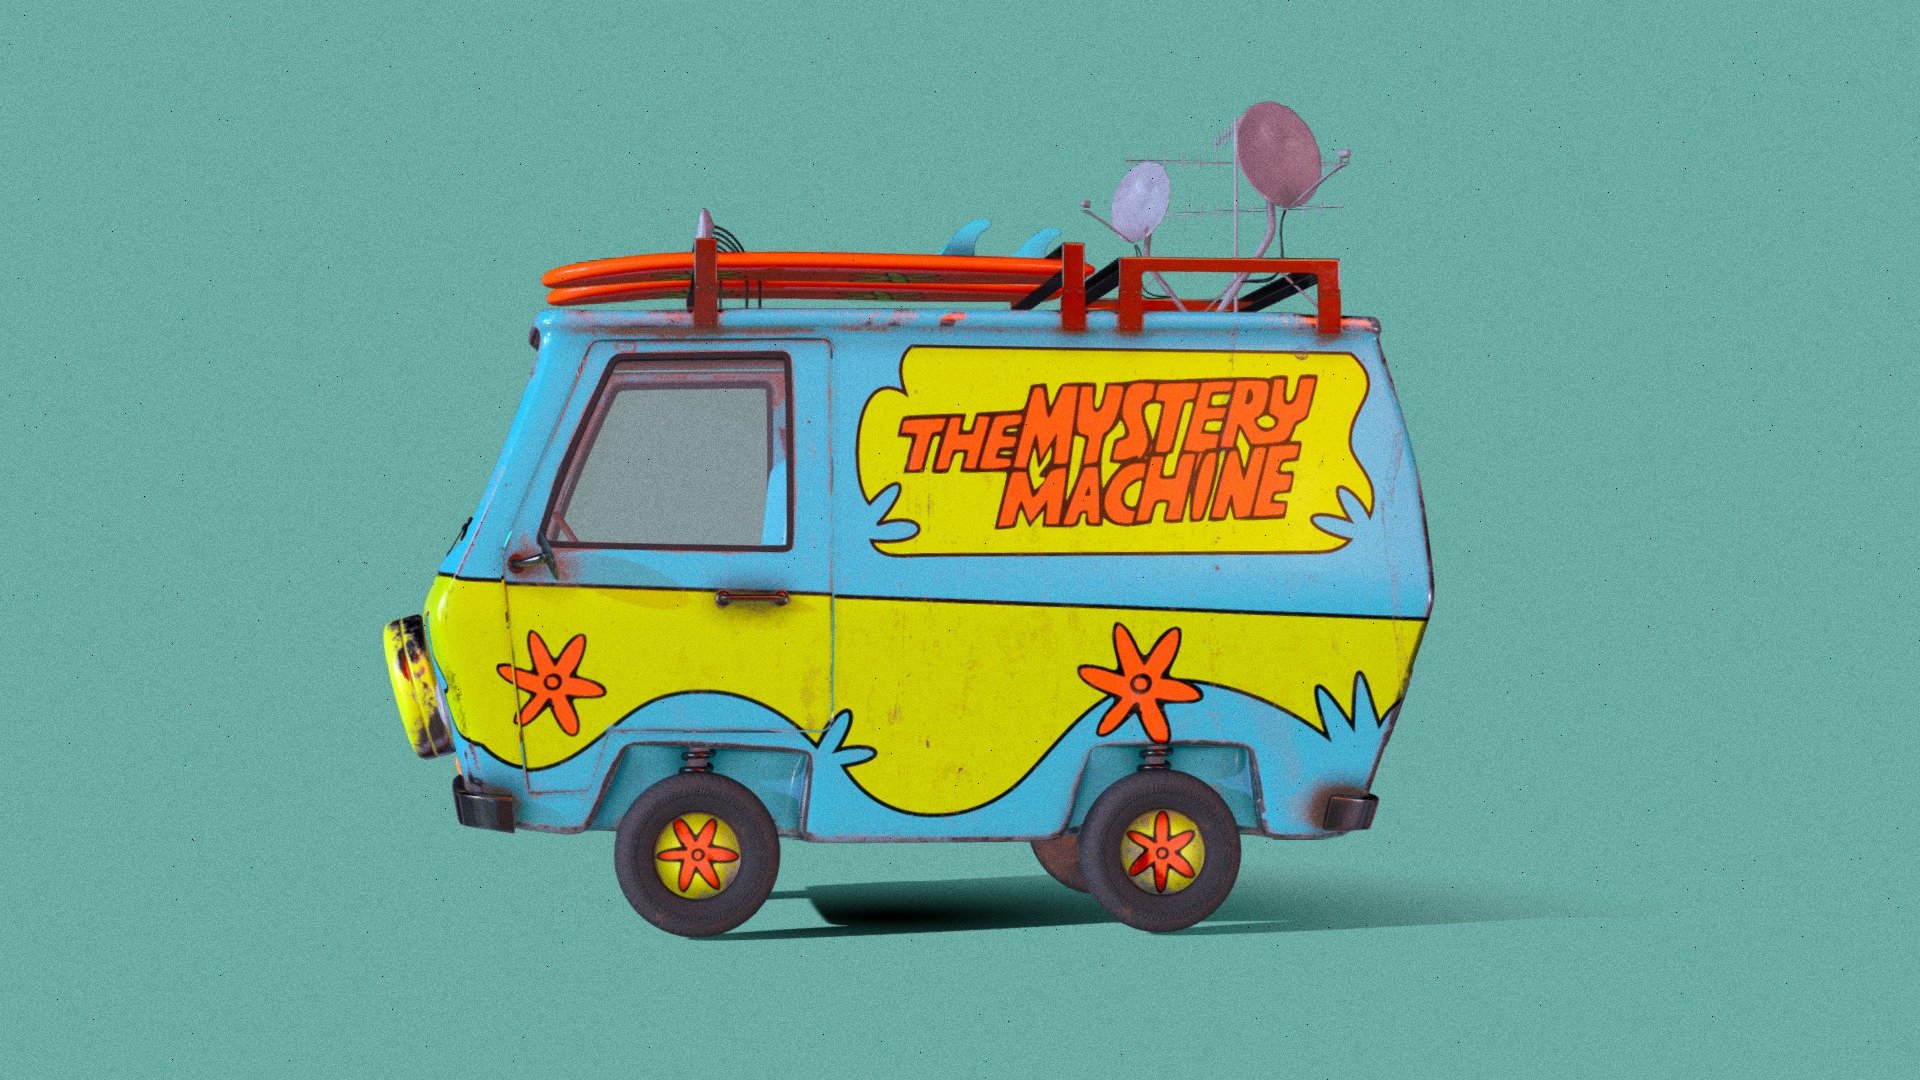 The Mystery Machine fanart of the famous van from the scooby doo show. I've added some other assets to the model 3d model